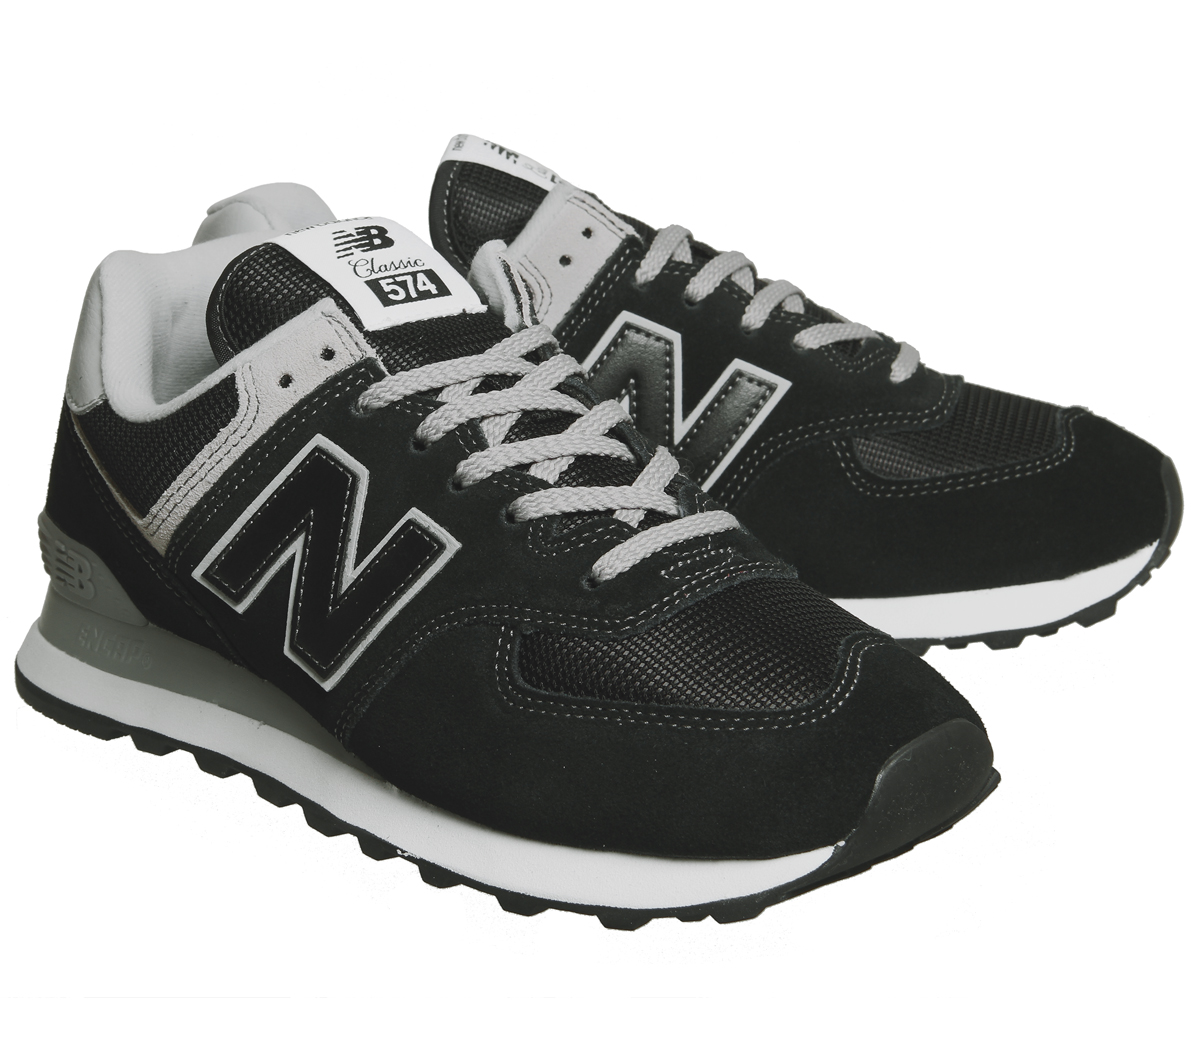 New Balance 574 Trainers Black - His trainers